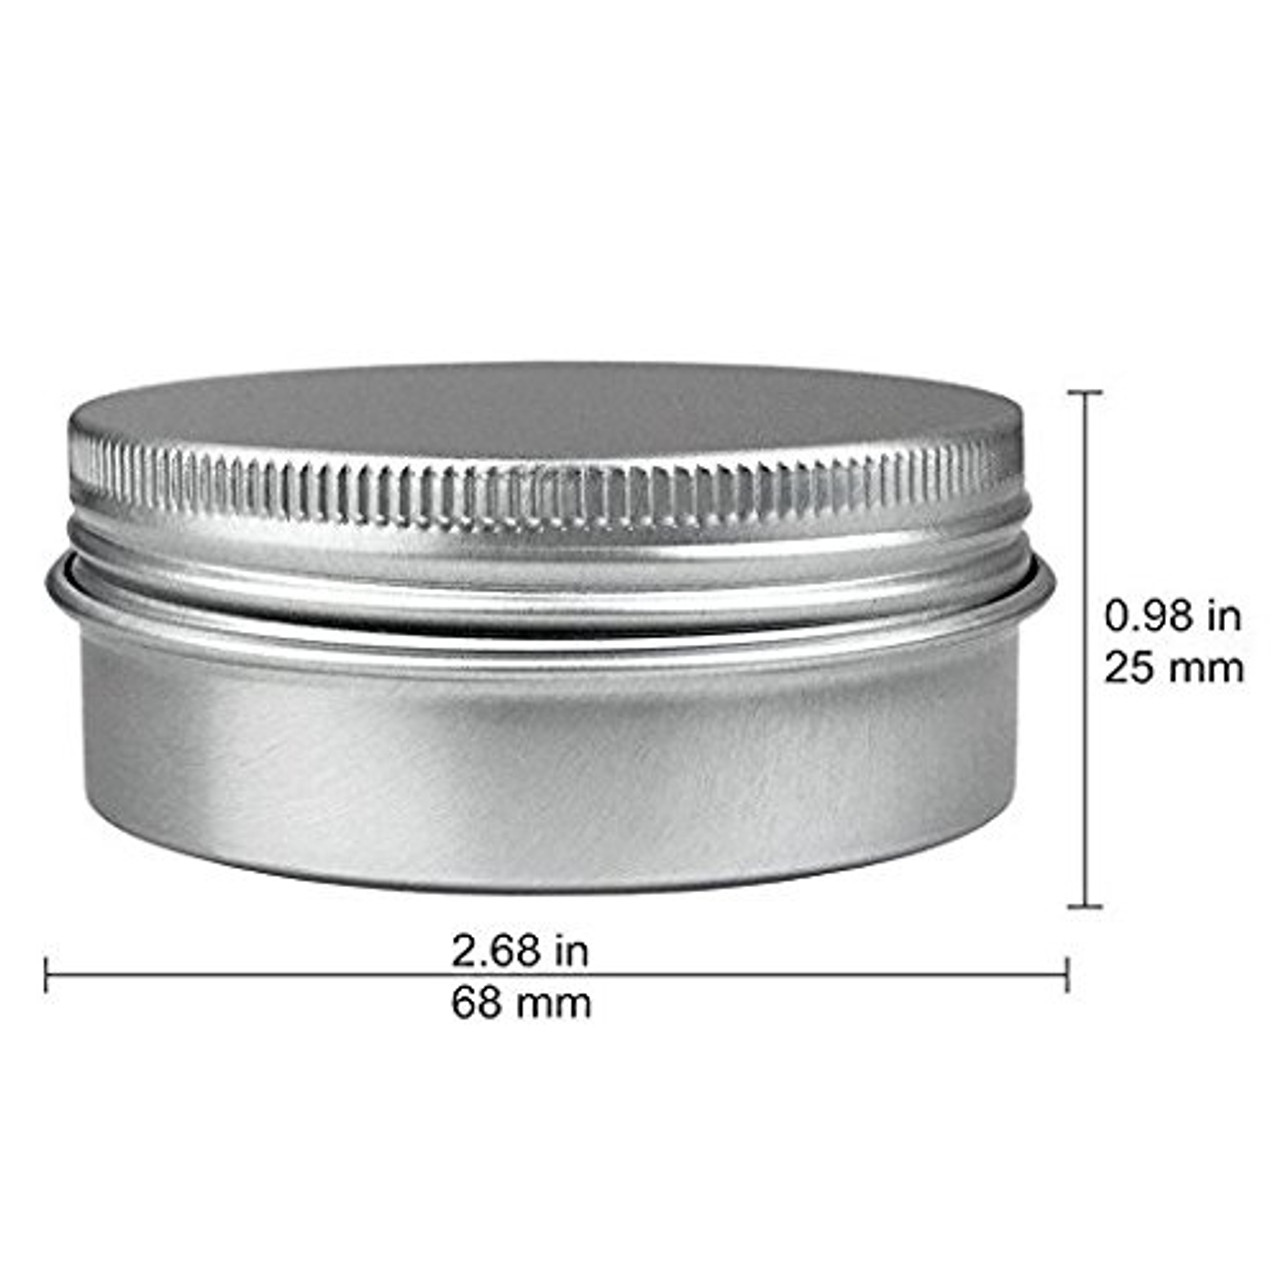  BENECREAT 24 Pack 0.33 OZ Tin Cans Screw Top Round Aluminum  Cans Screw Lid Containers - Great for Store Spices, Candies, Tea or Gift  Giving (Platinum)